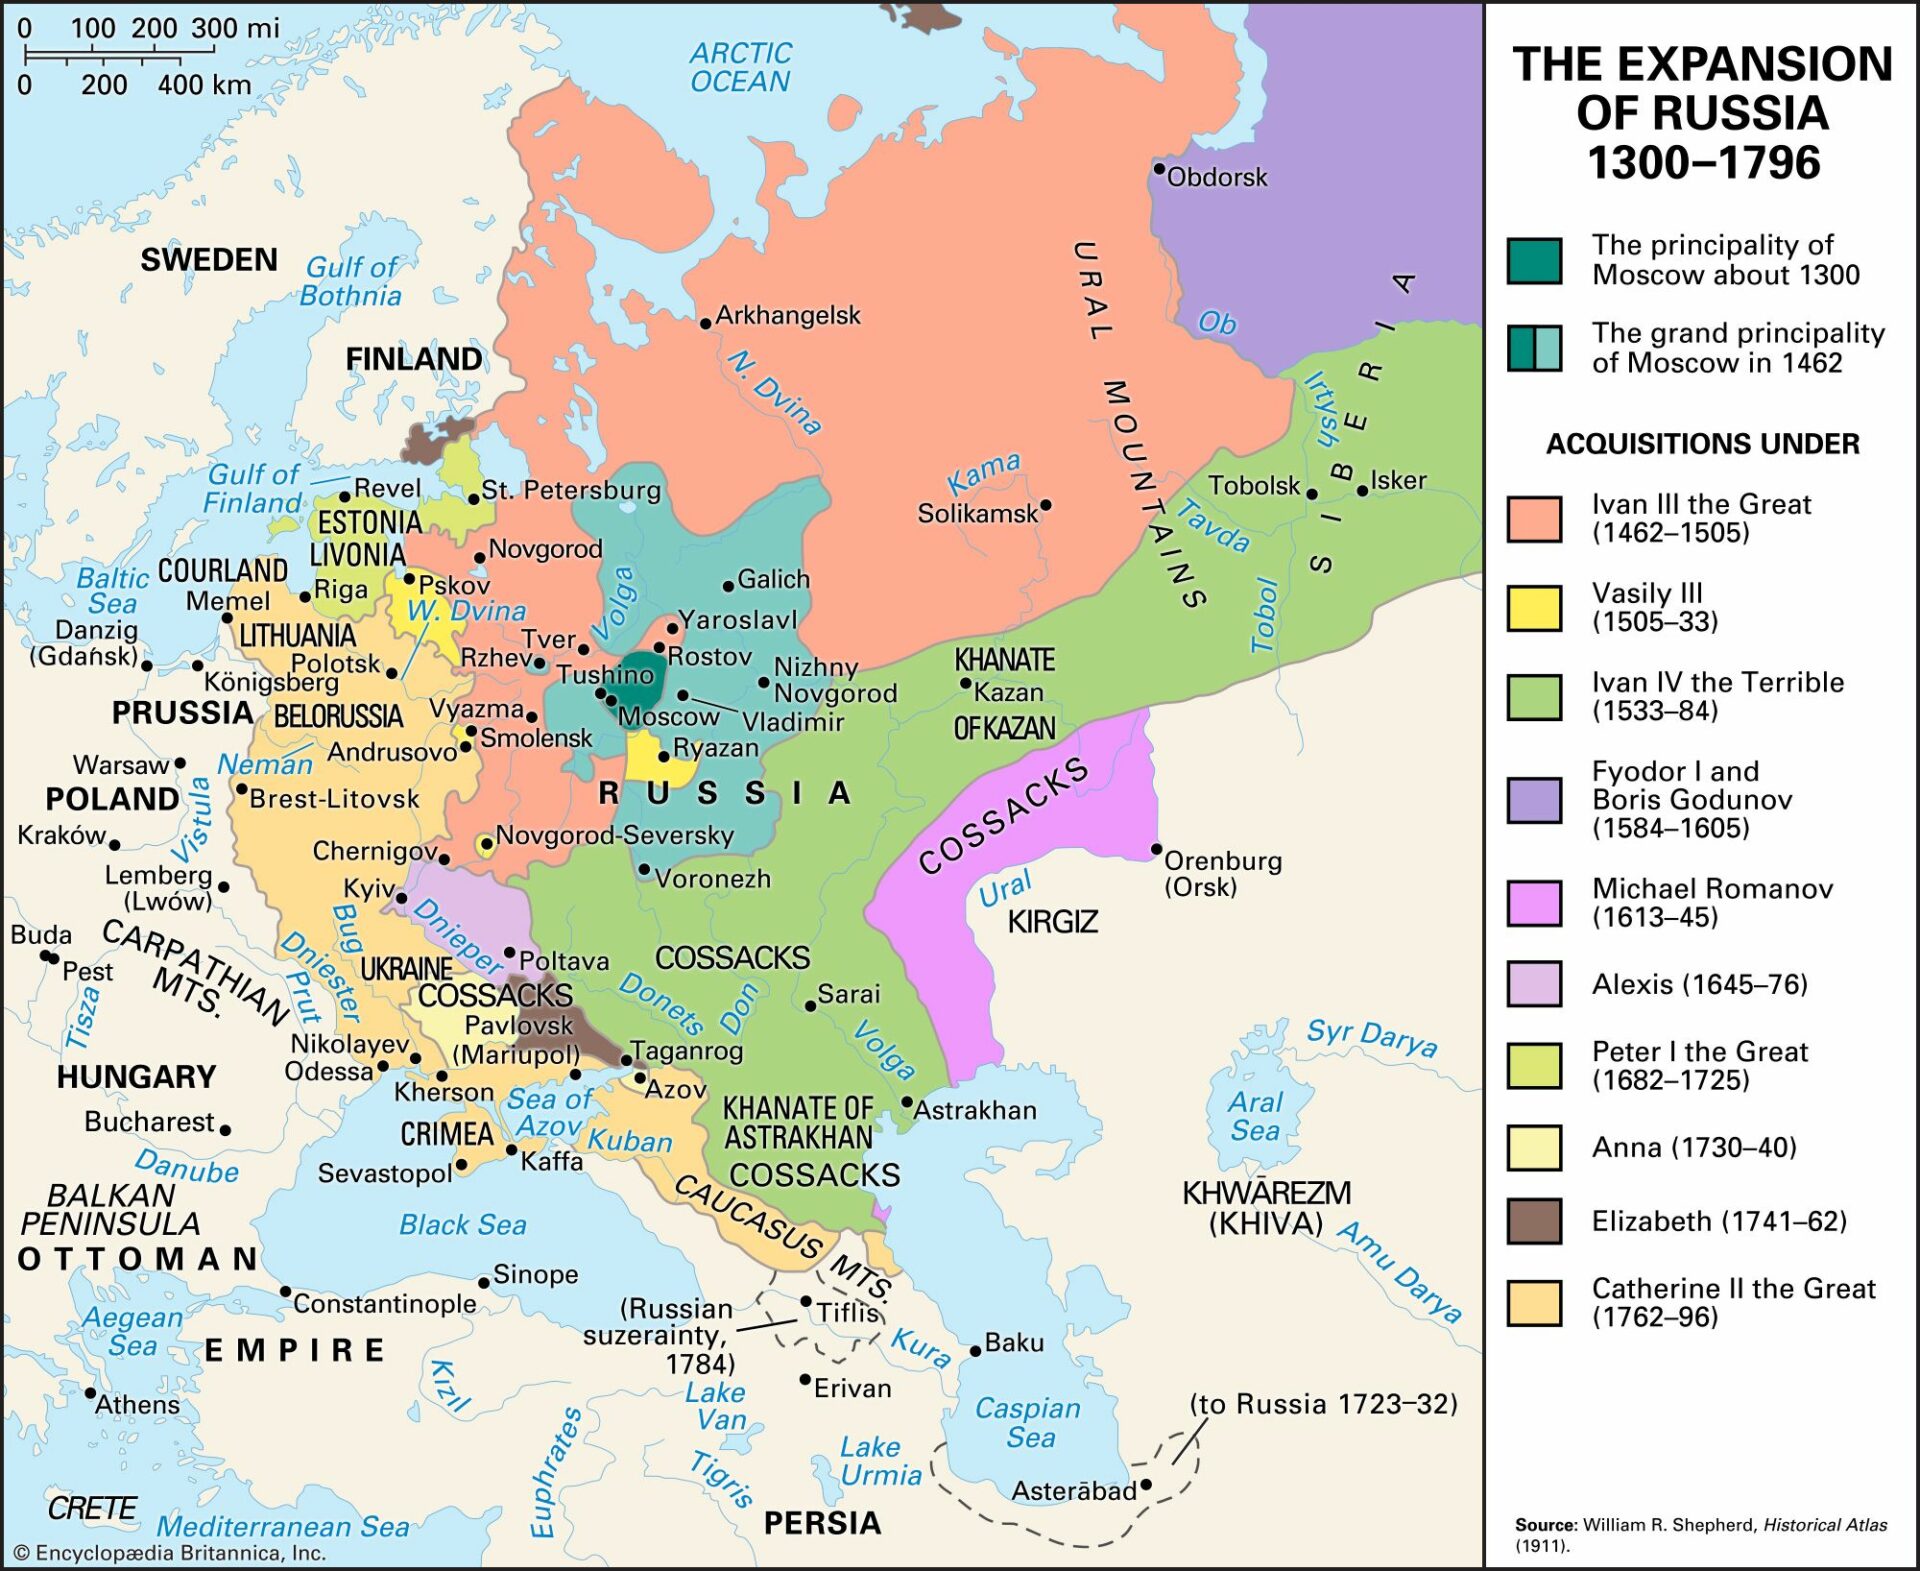 Russia and Peter the Great, 1682-1725 | The Old Regimes